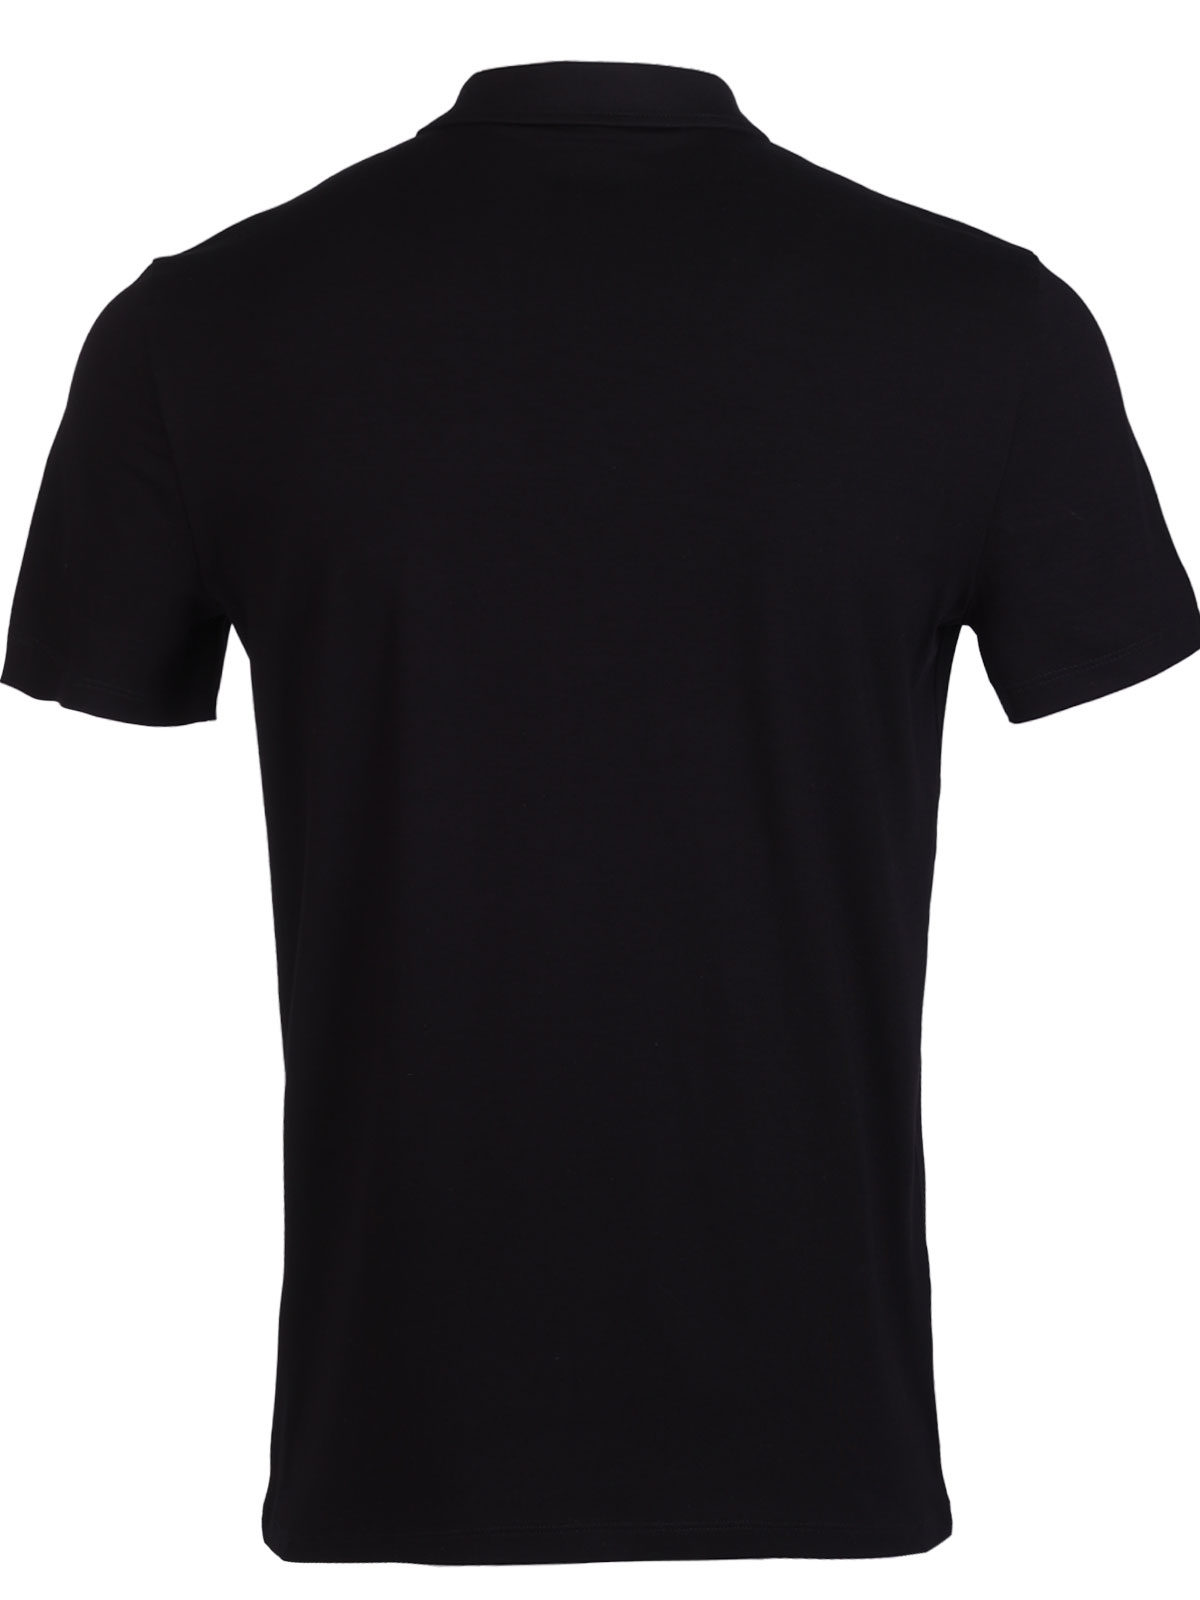 Tshirt in black with a collar - 94420 € 33.18 img2